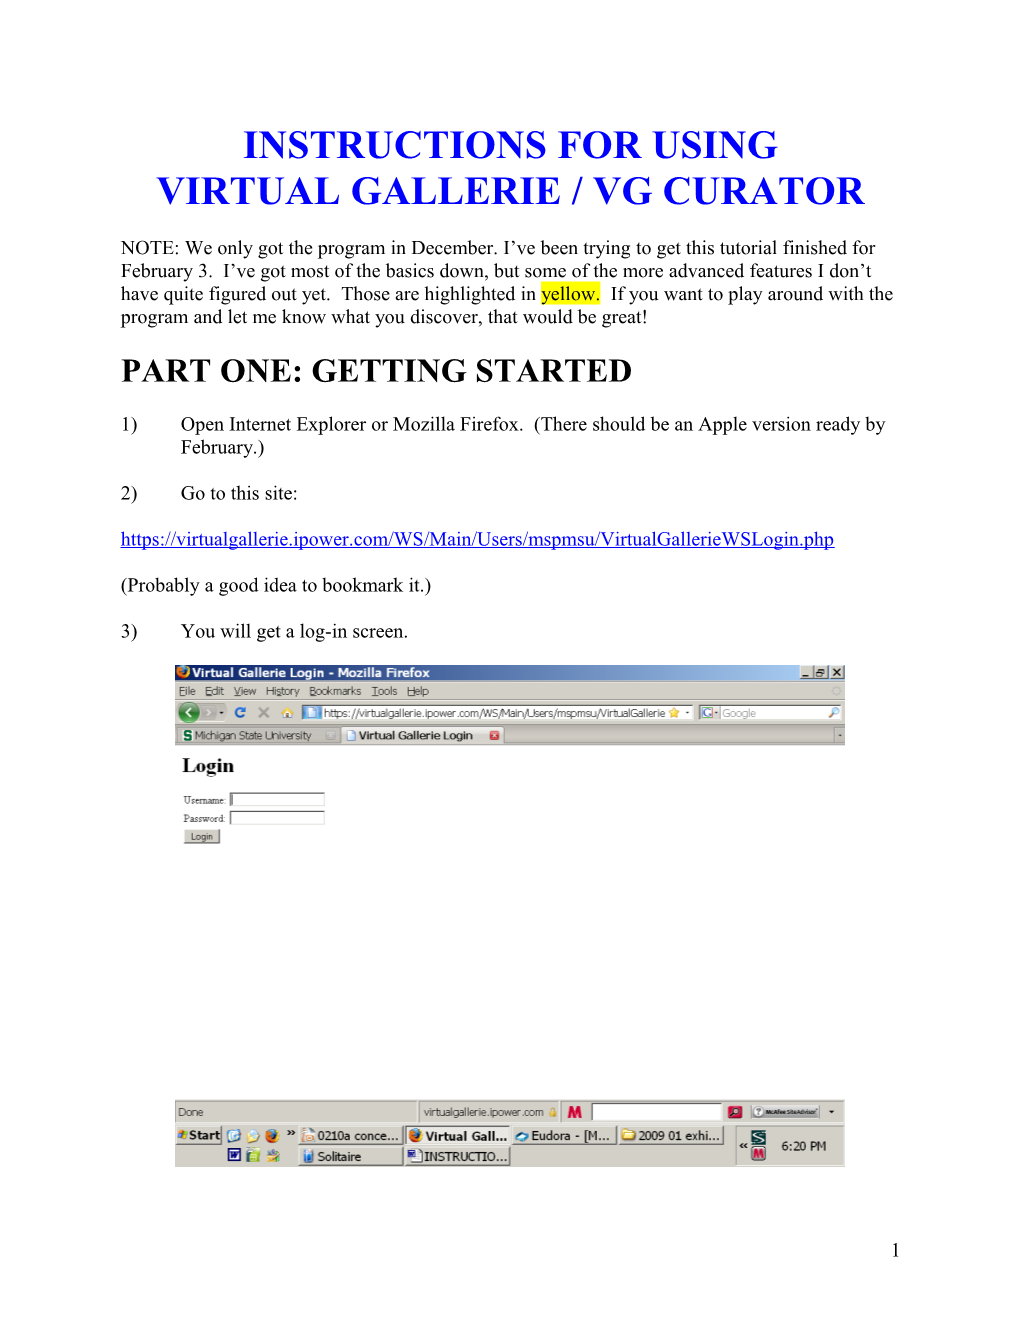 Instructions for Using Virtual Gallerie / Vg Curator